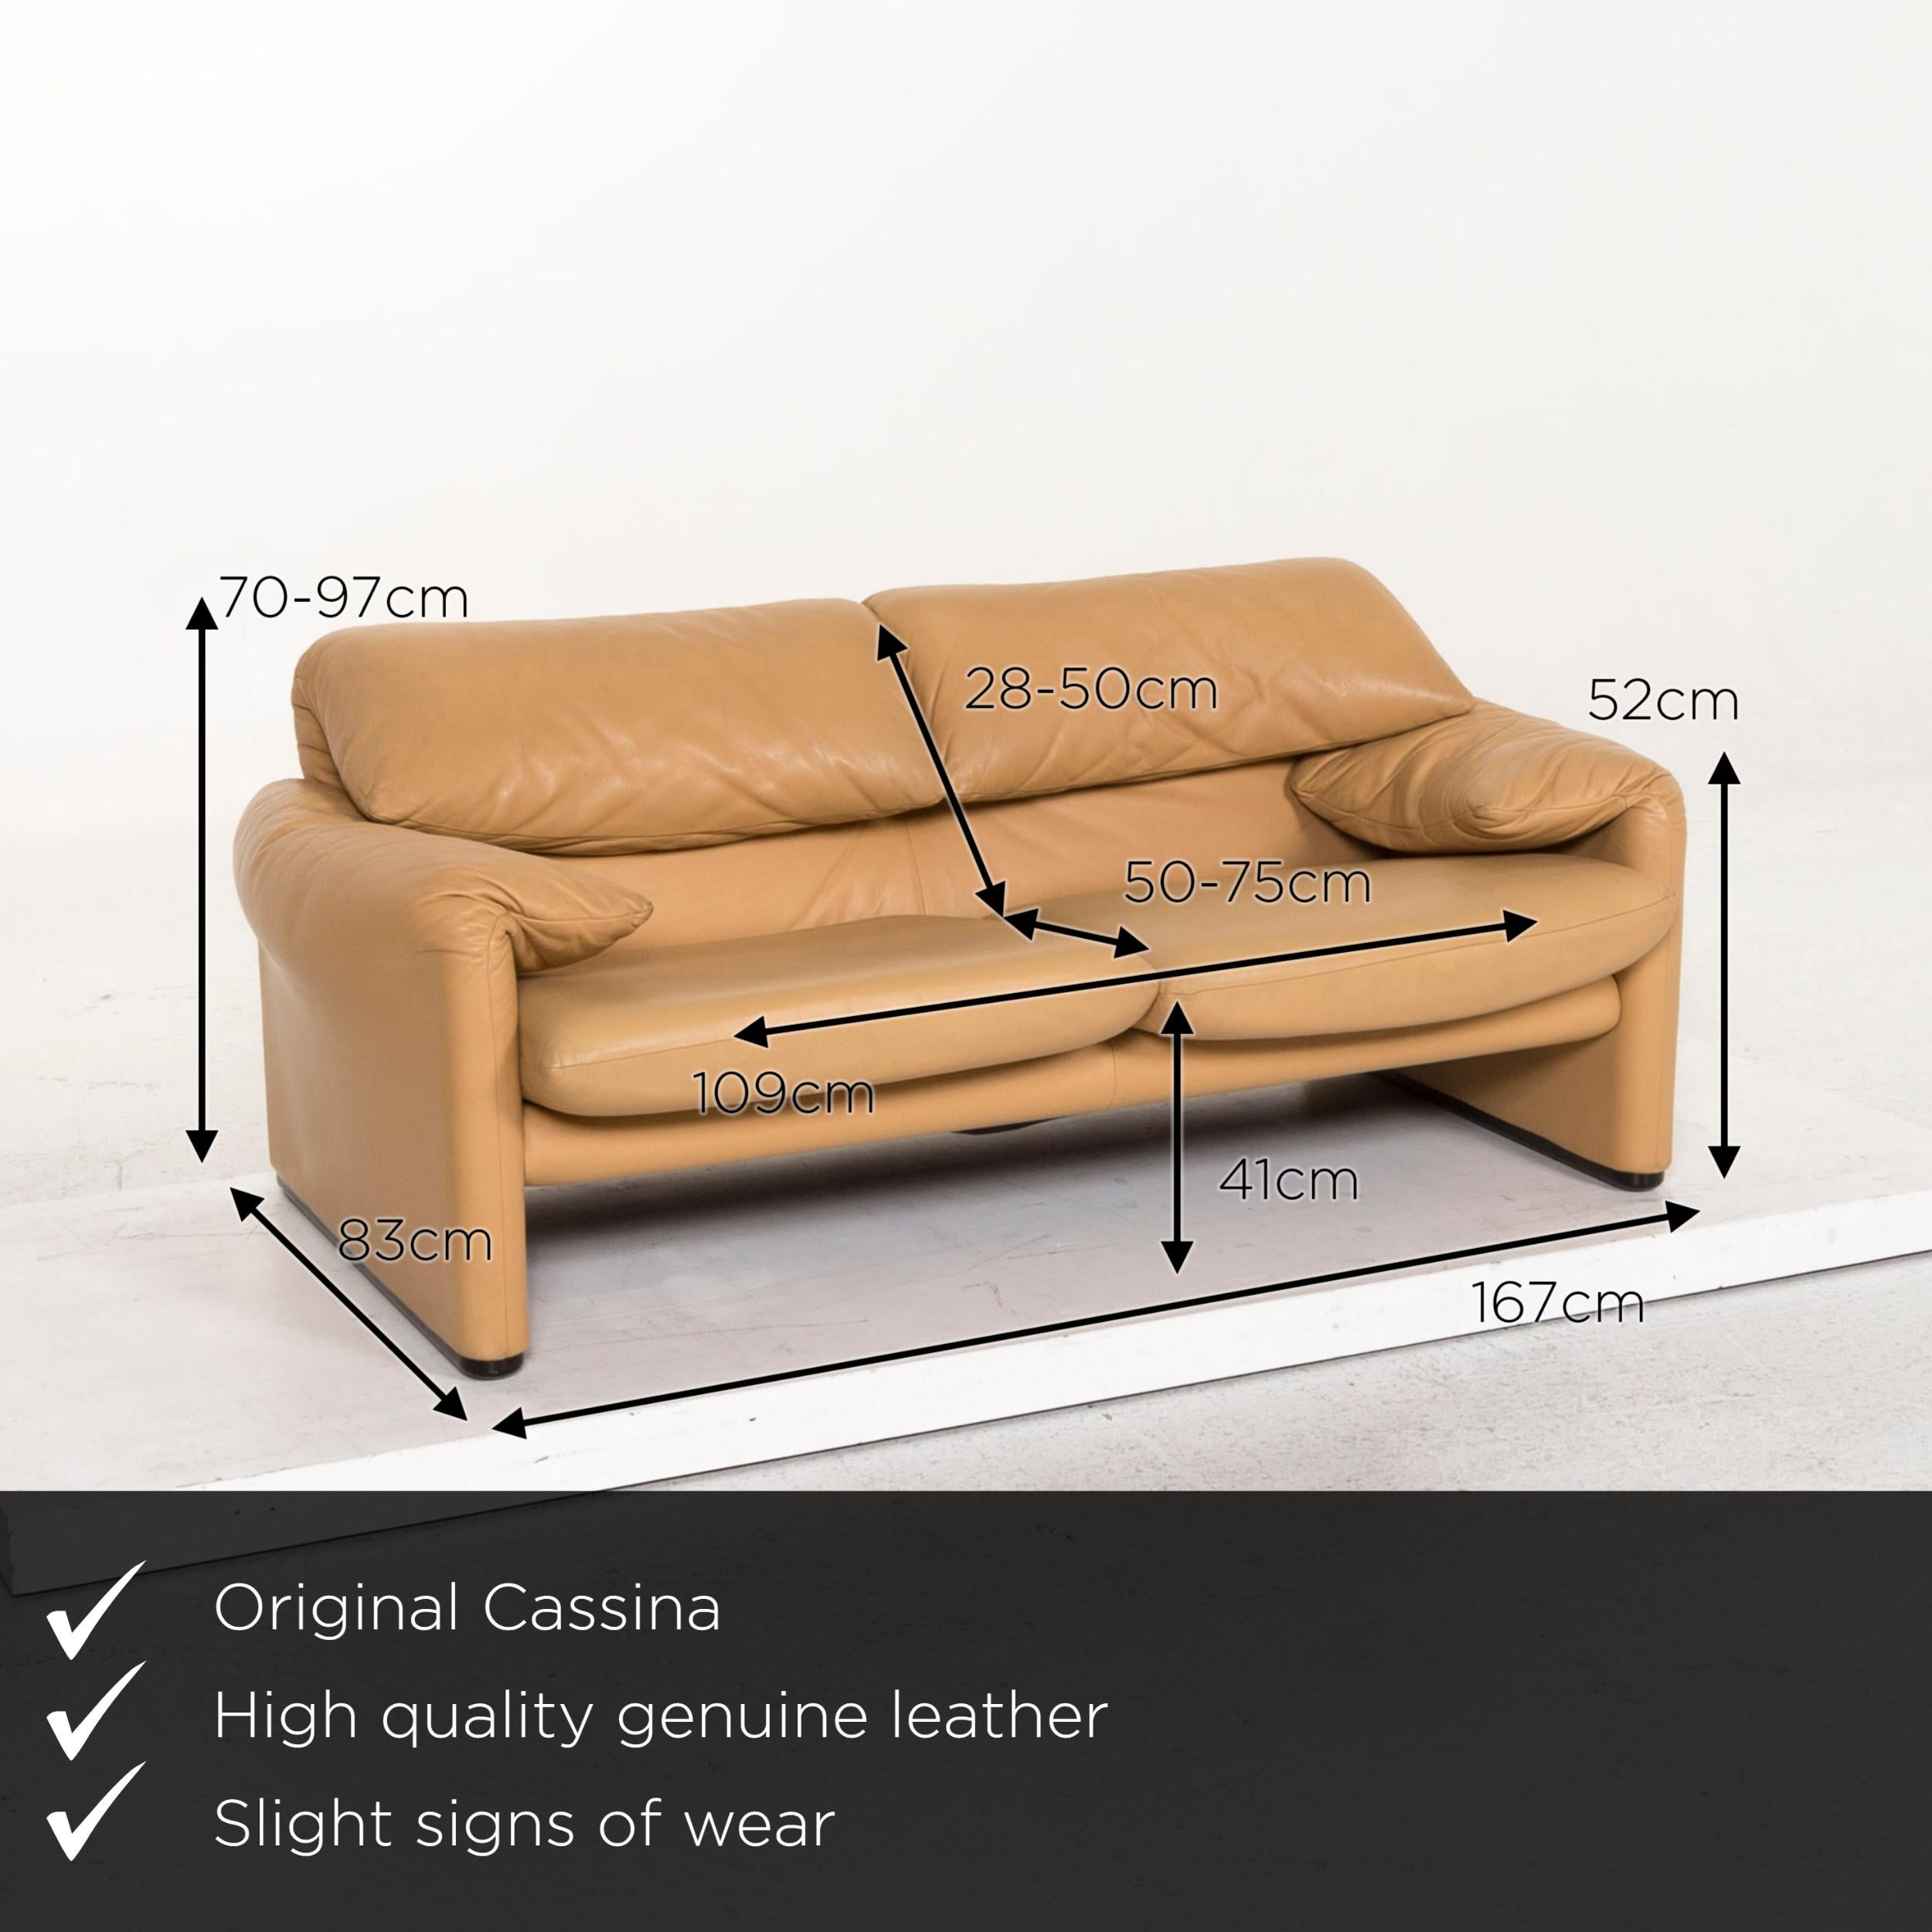 We present to you a Cassina Maralunga leather sofa beige two-seat function couch.
 

 Product measurements in centimeters:
 

Depth 83
Width 167
Height 70
Seat height 41
Rest height 52
Seat depth 50
Seat width 109
Back height 28.
 